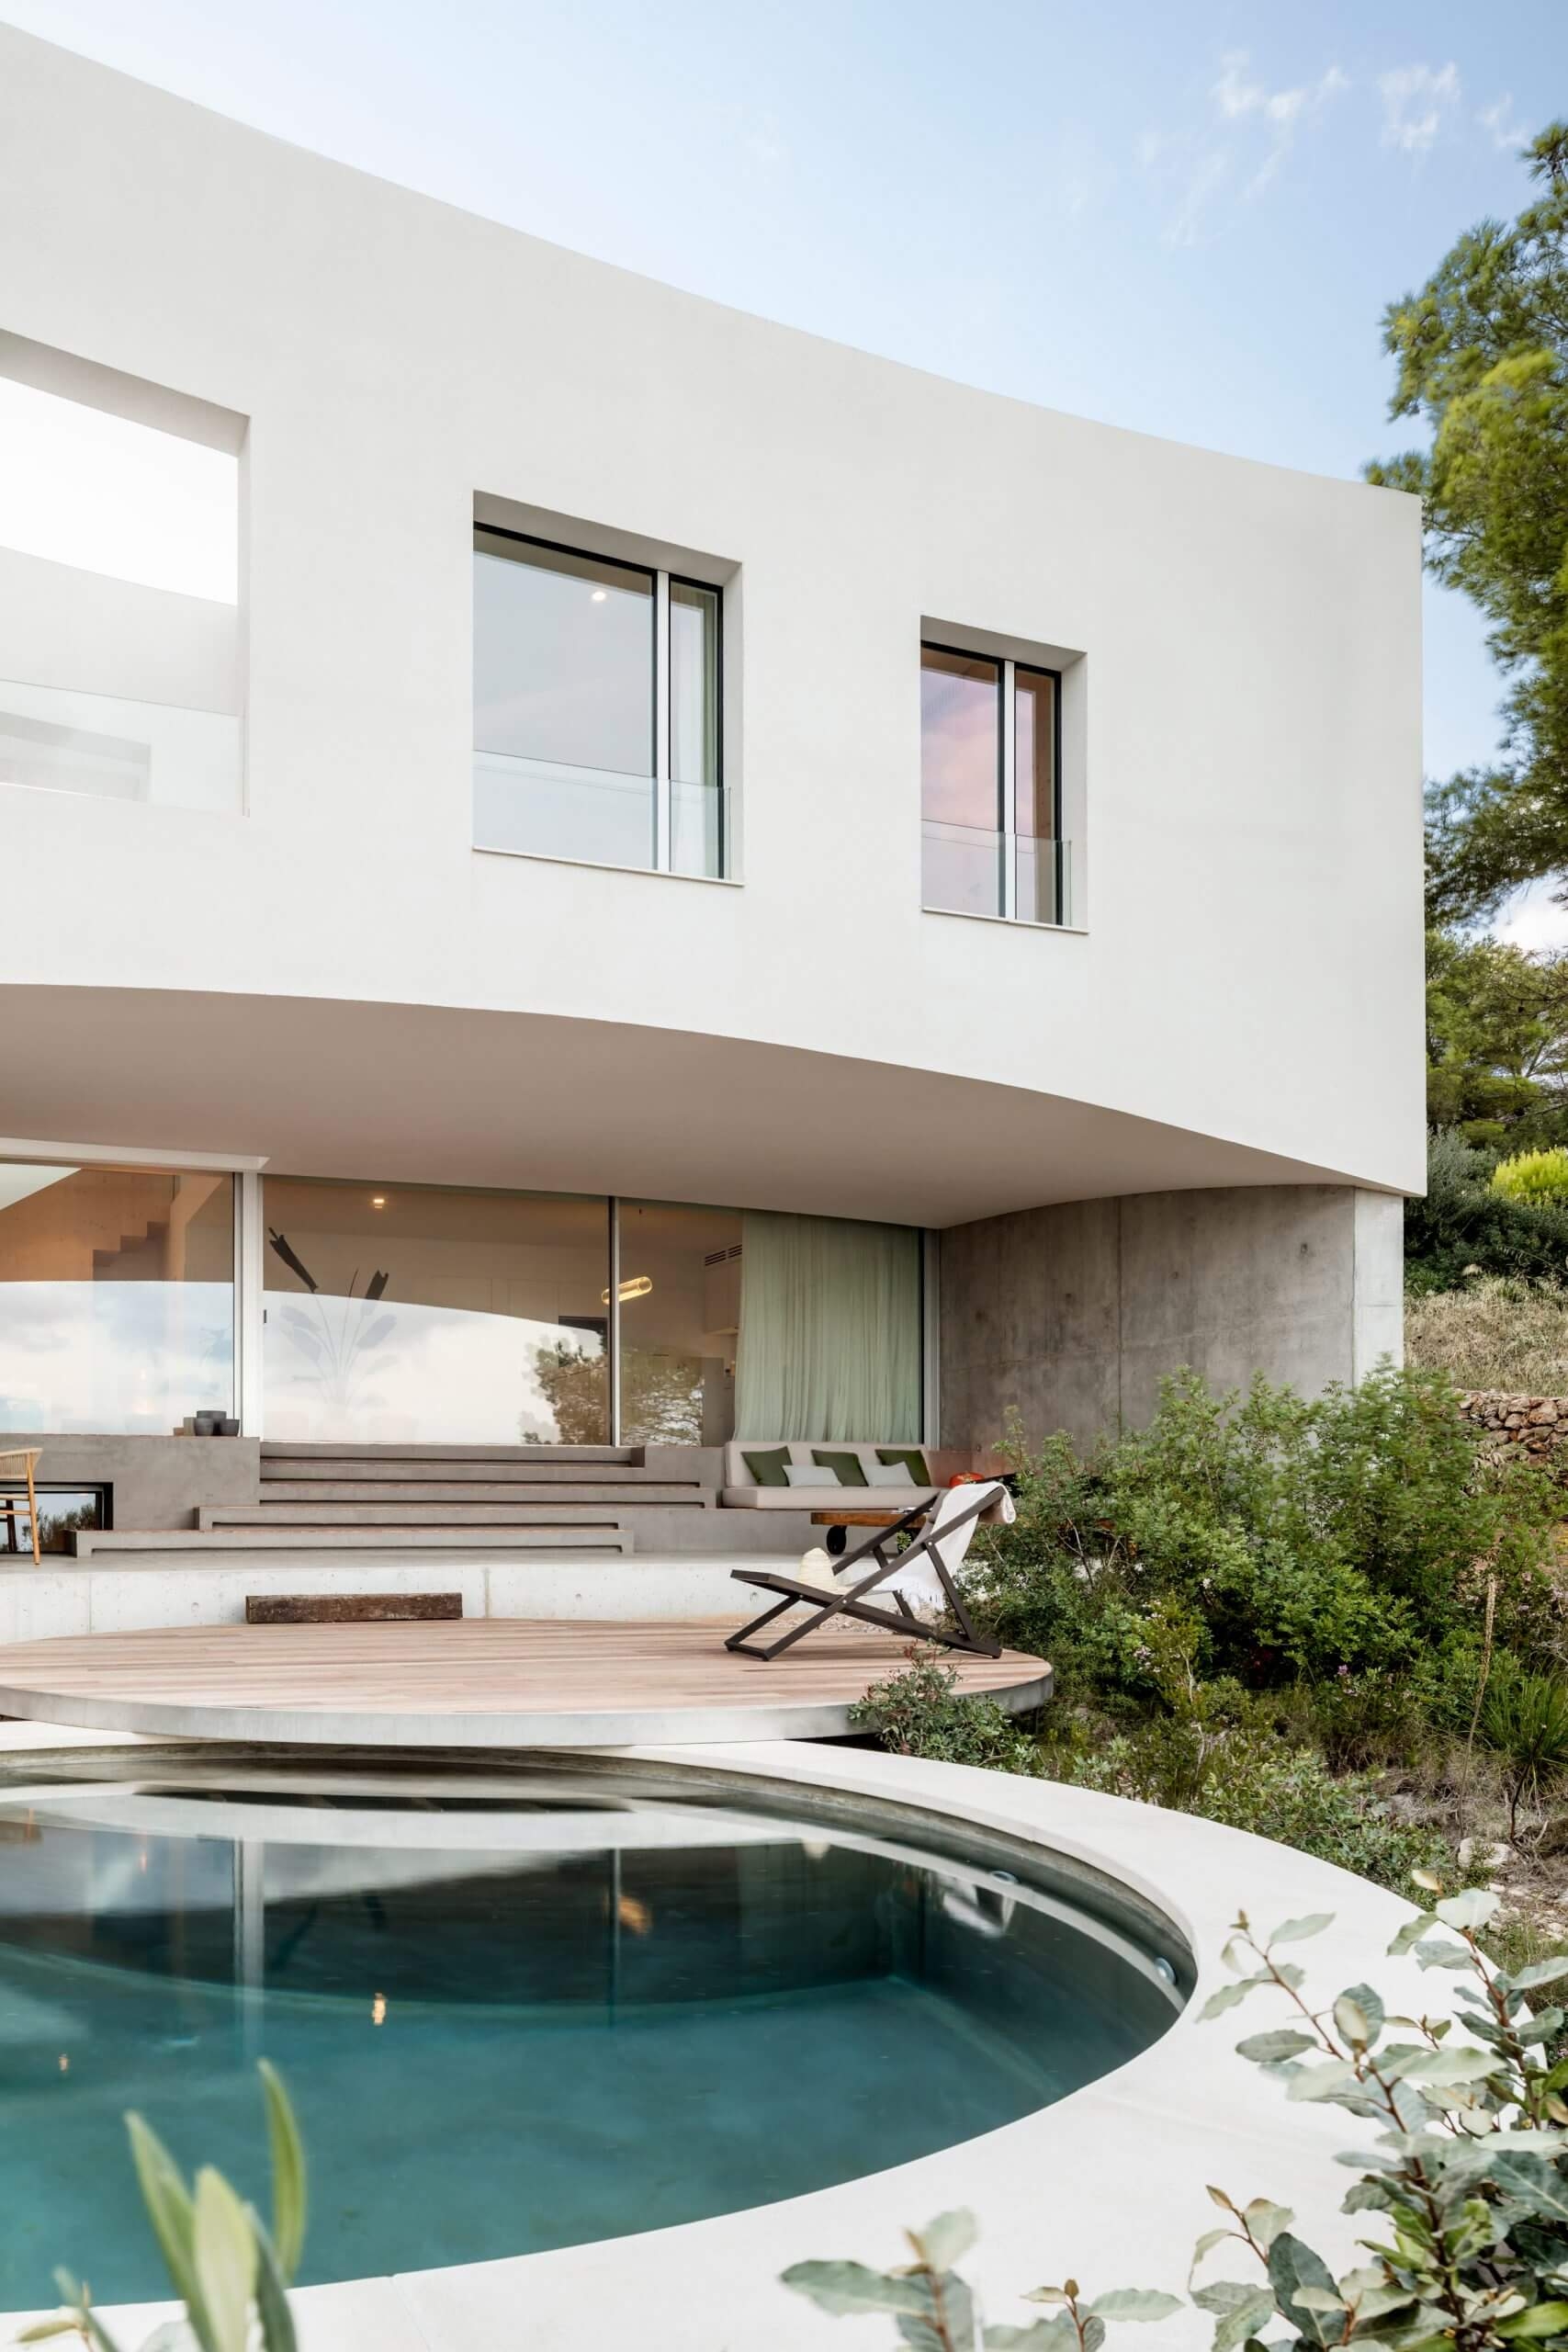 nomo studio curved house menorca spain architecture residential dezeen 2364 col 21 scaled 1